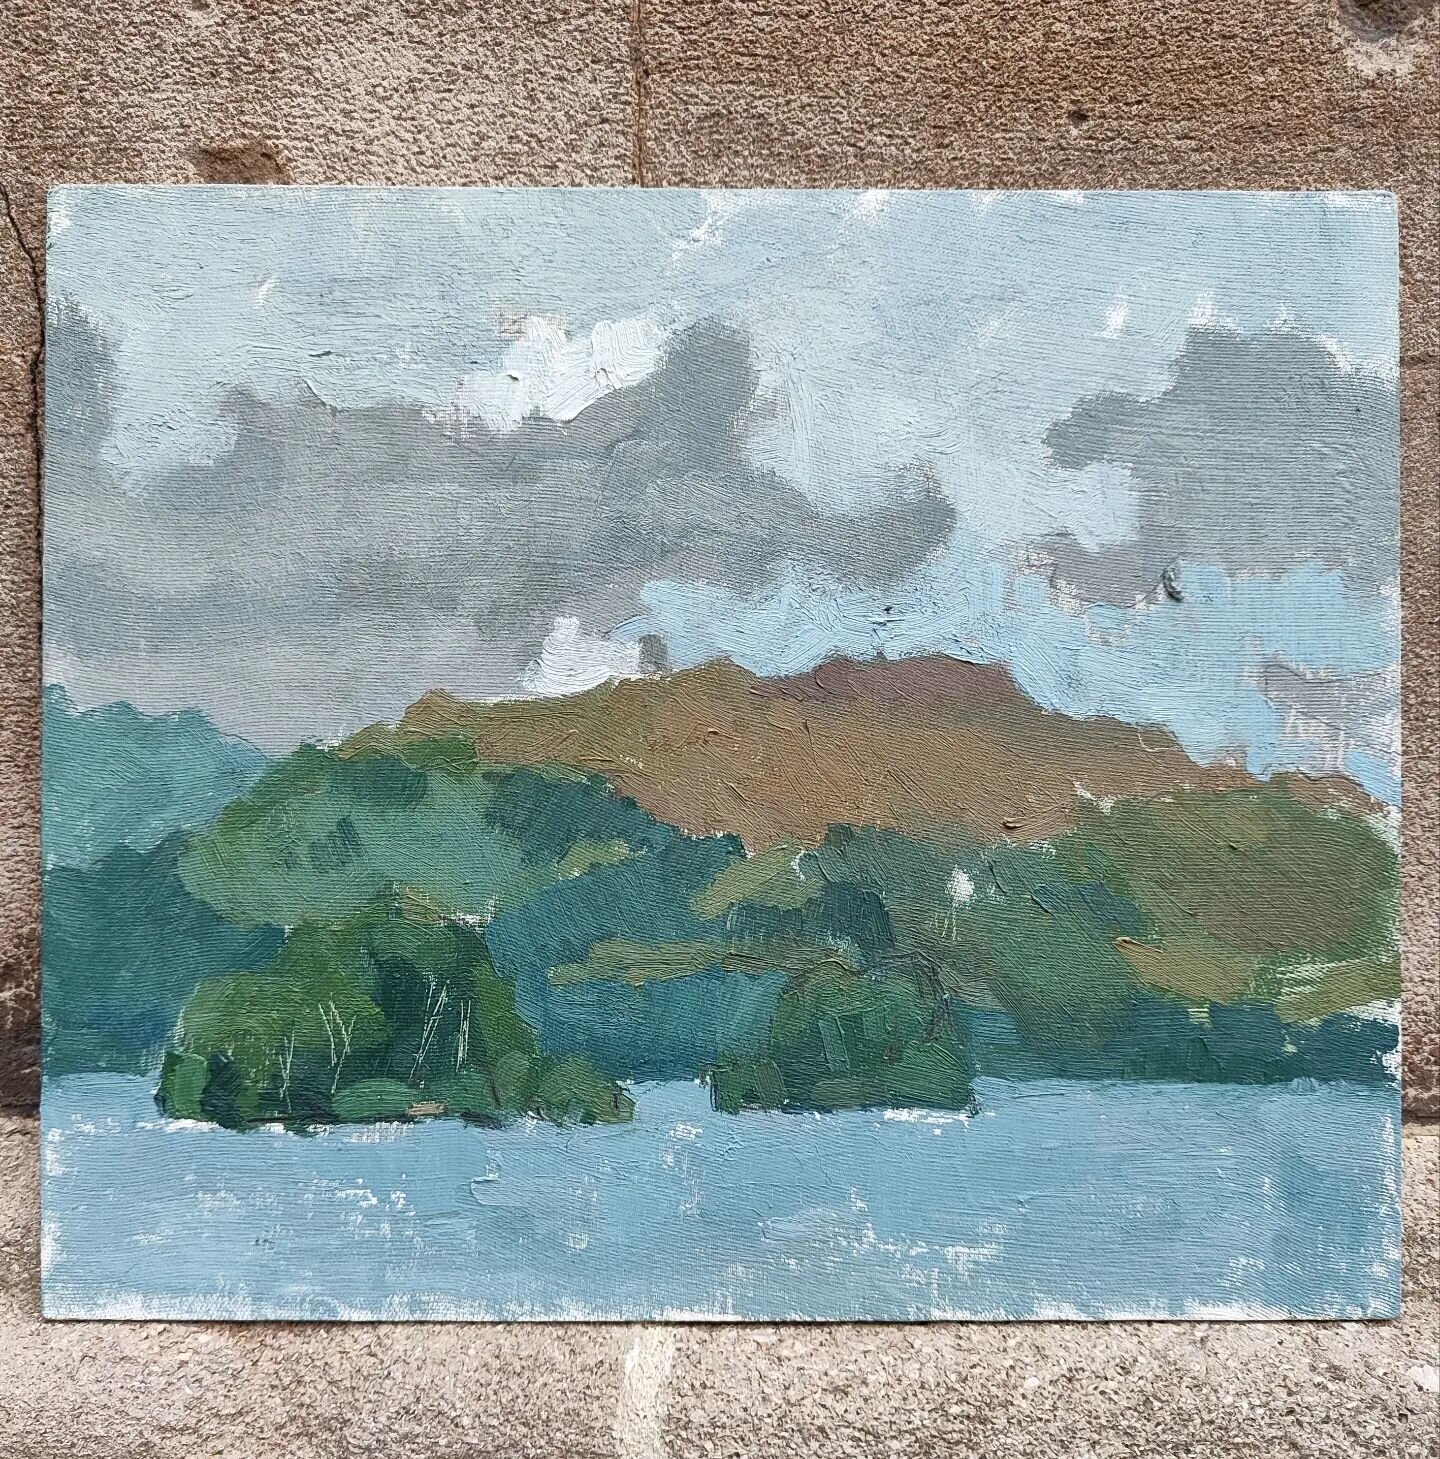 Lake Windermere, 2022
Oil on board
30 x 26cm

I particularly enjoyed designing the sky, standing on the bank with fabulous painters (and a flock Canada geese) for company.  Hello @elliotroworth_artist and @stephenhawkinsart - remember this?

PS Those